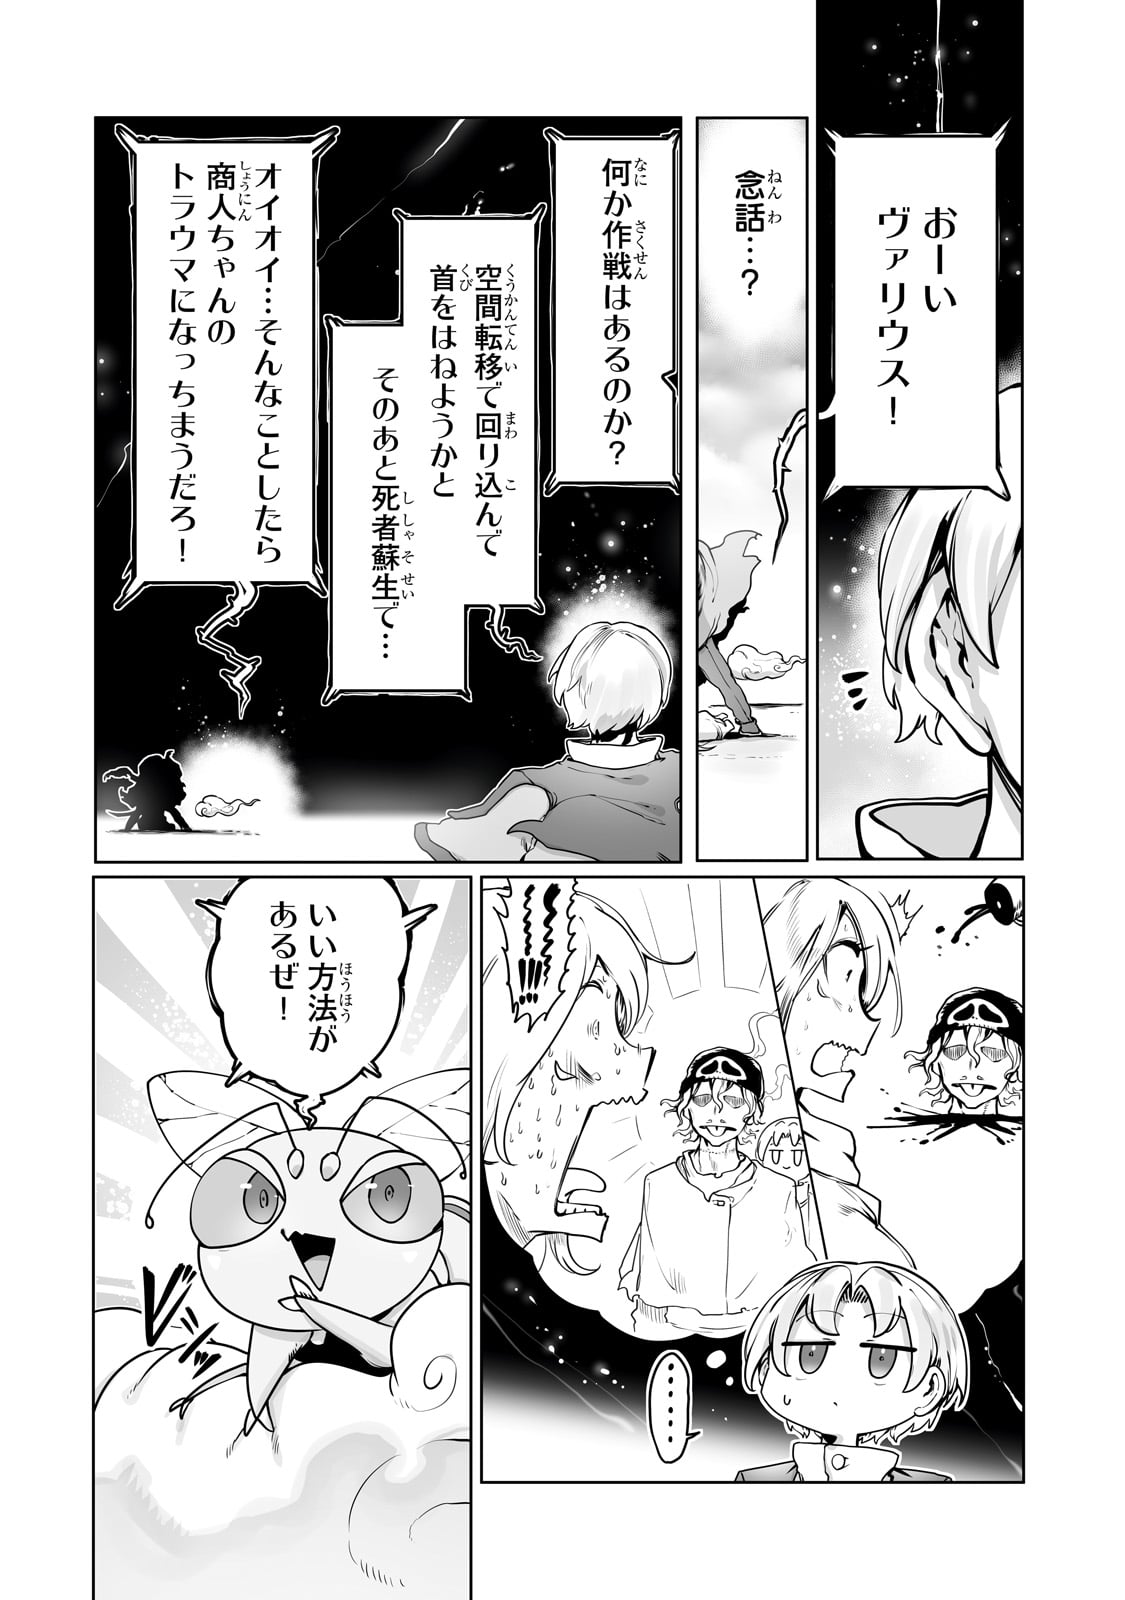 The Useless Tamer Will Turn Into the Top Unconsciously by My Previous Life Knowledge - Chapter 36 - Page 2